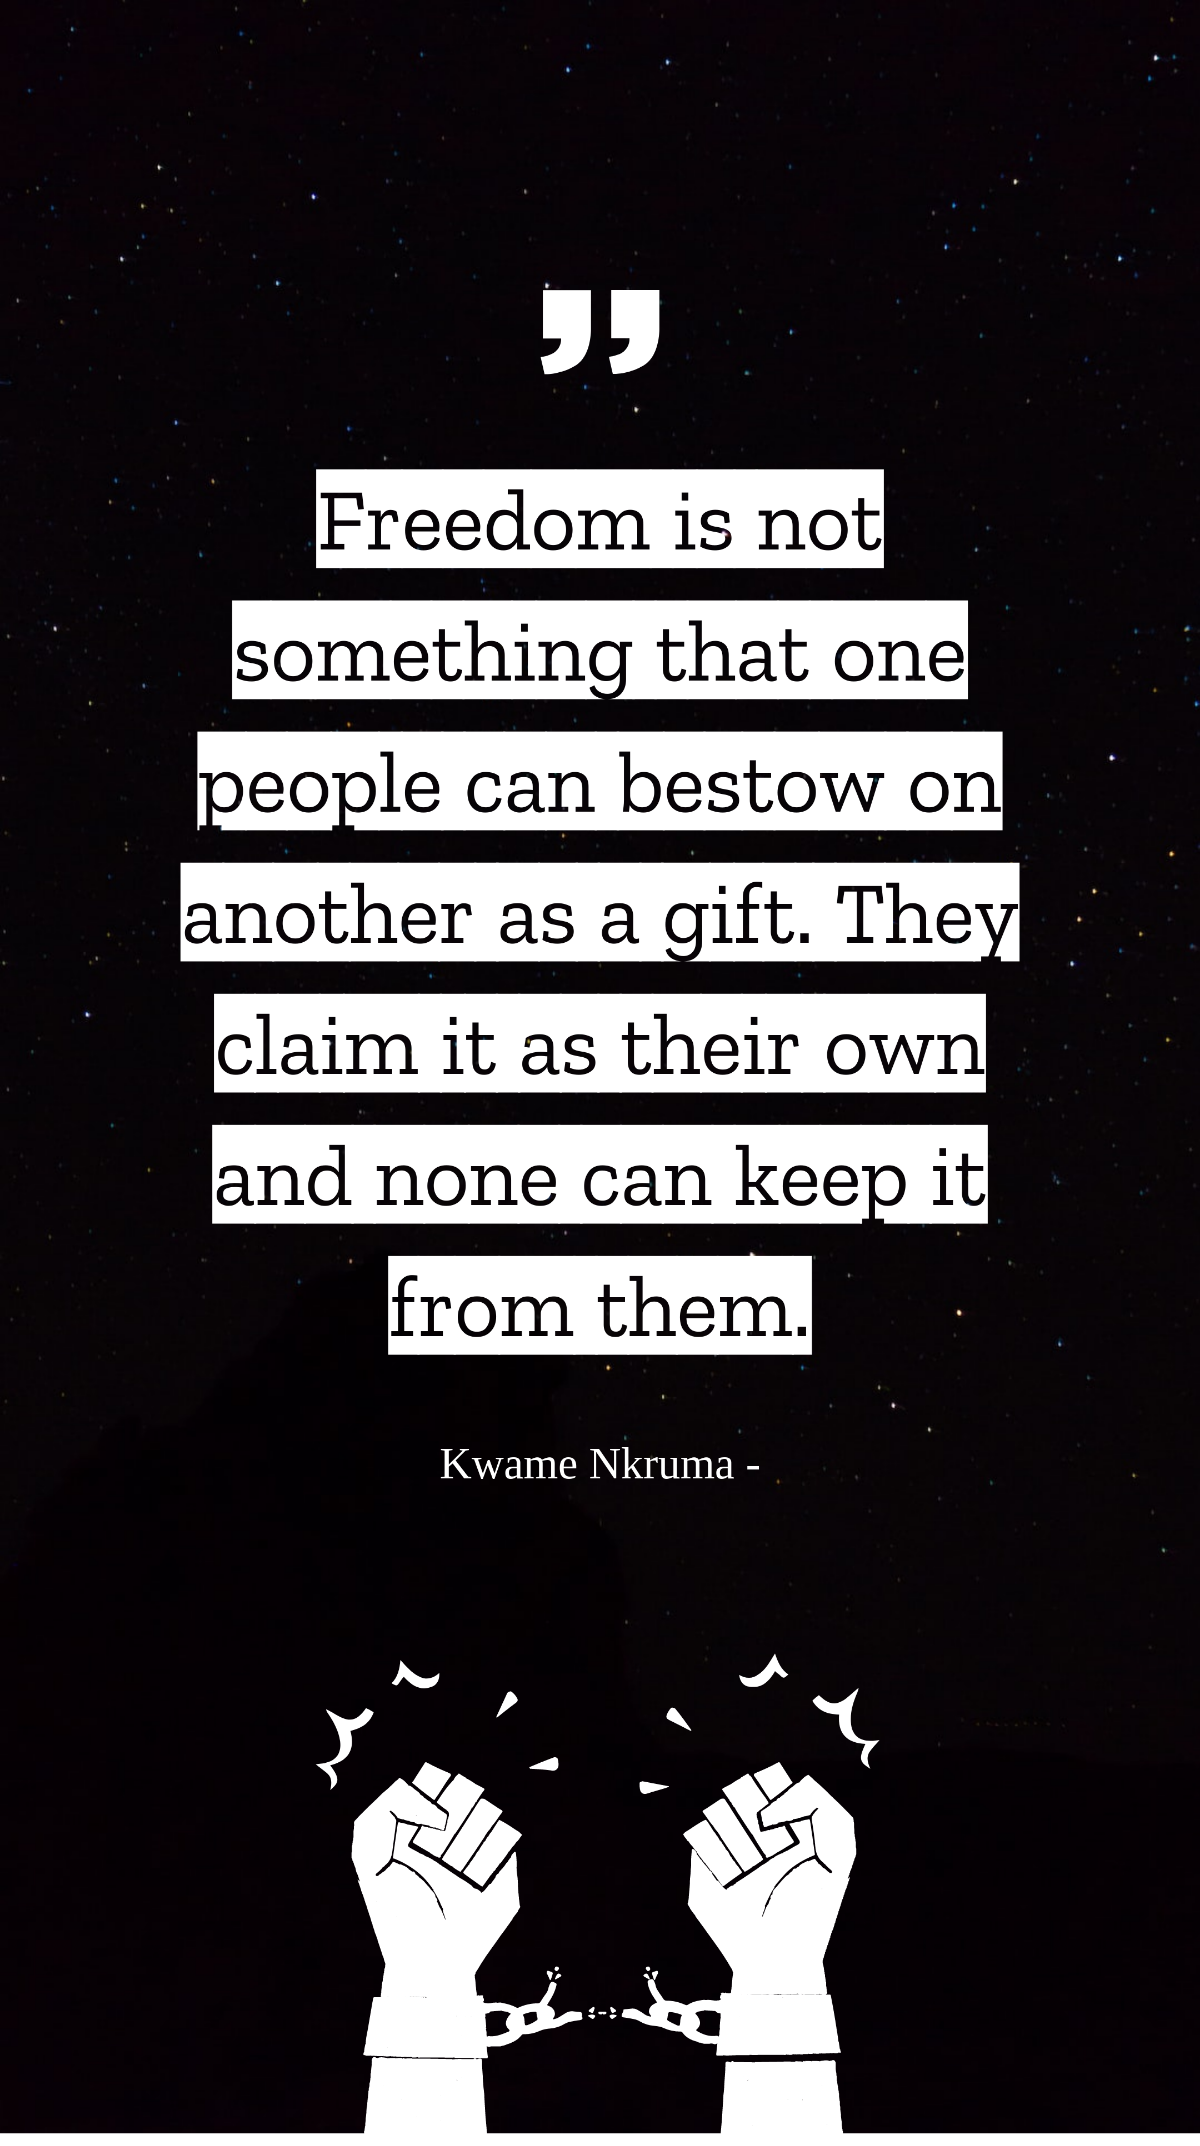 Kwame Nkruma - Freedom is not something that one people can bestow on another as a gift. They claim it as their own and none can keep it from them.